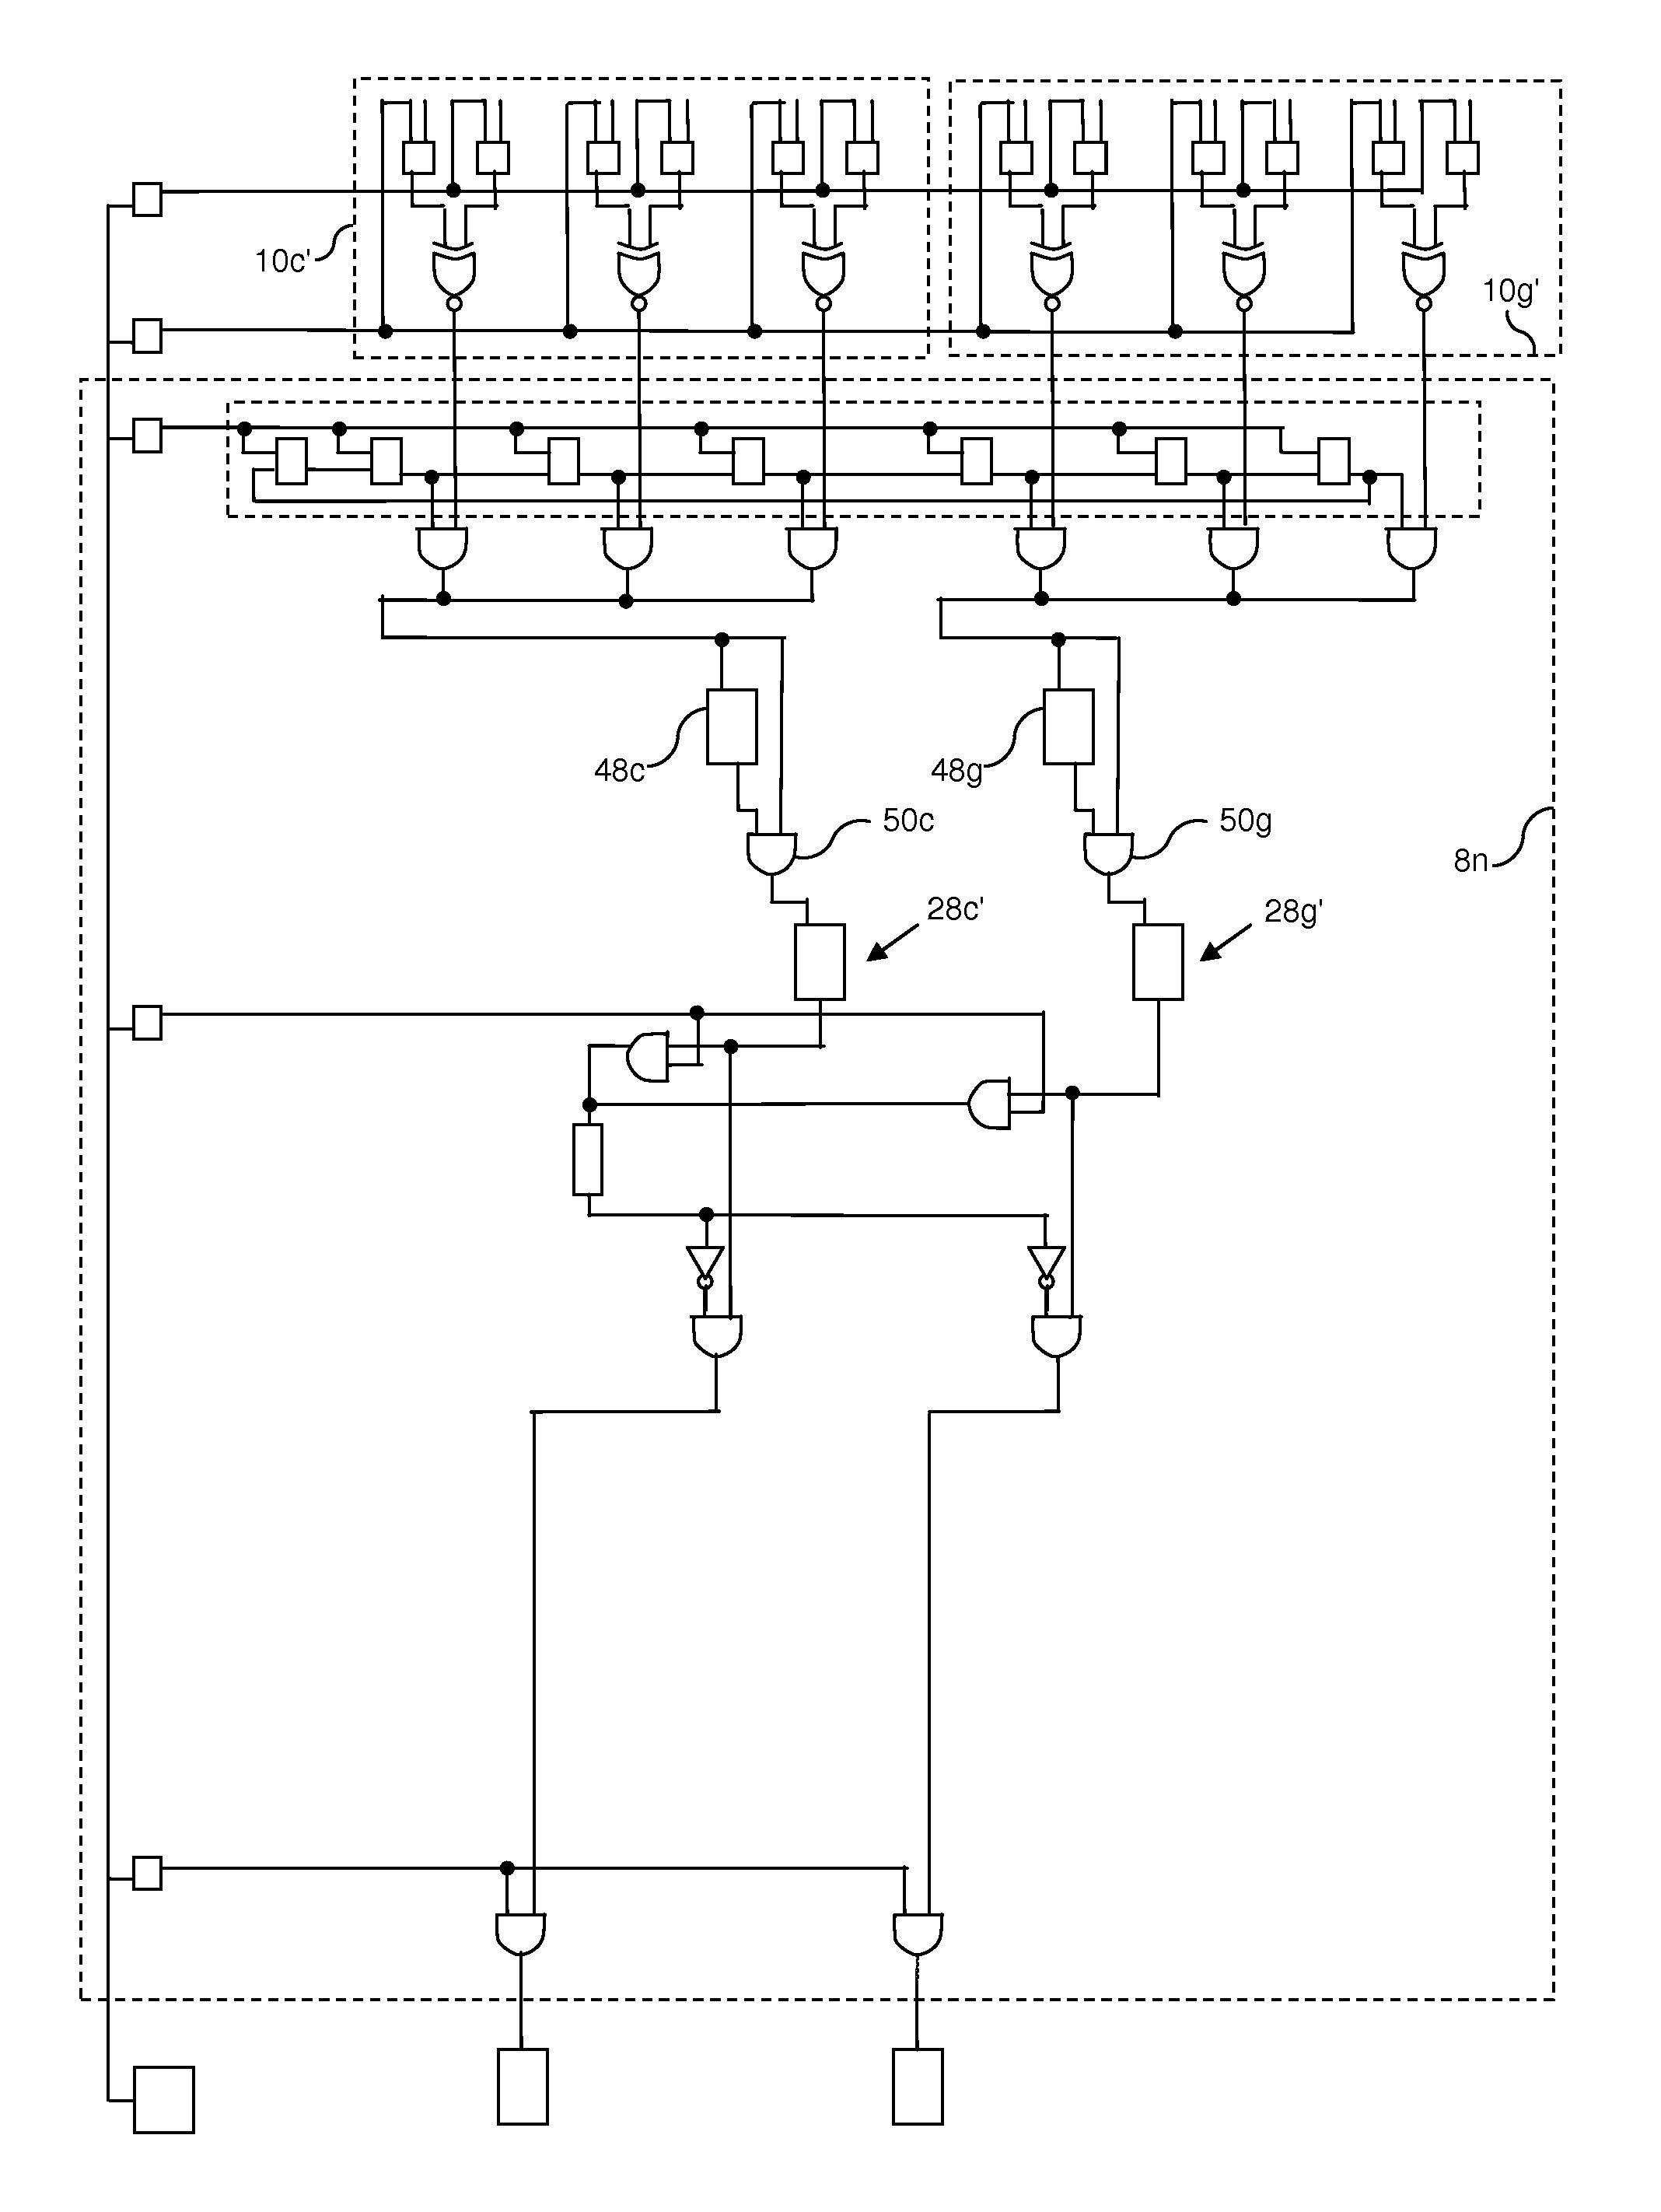 Method of Pattern Recognition for Artificial Intelligence